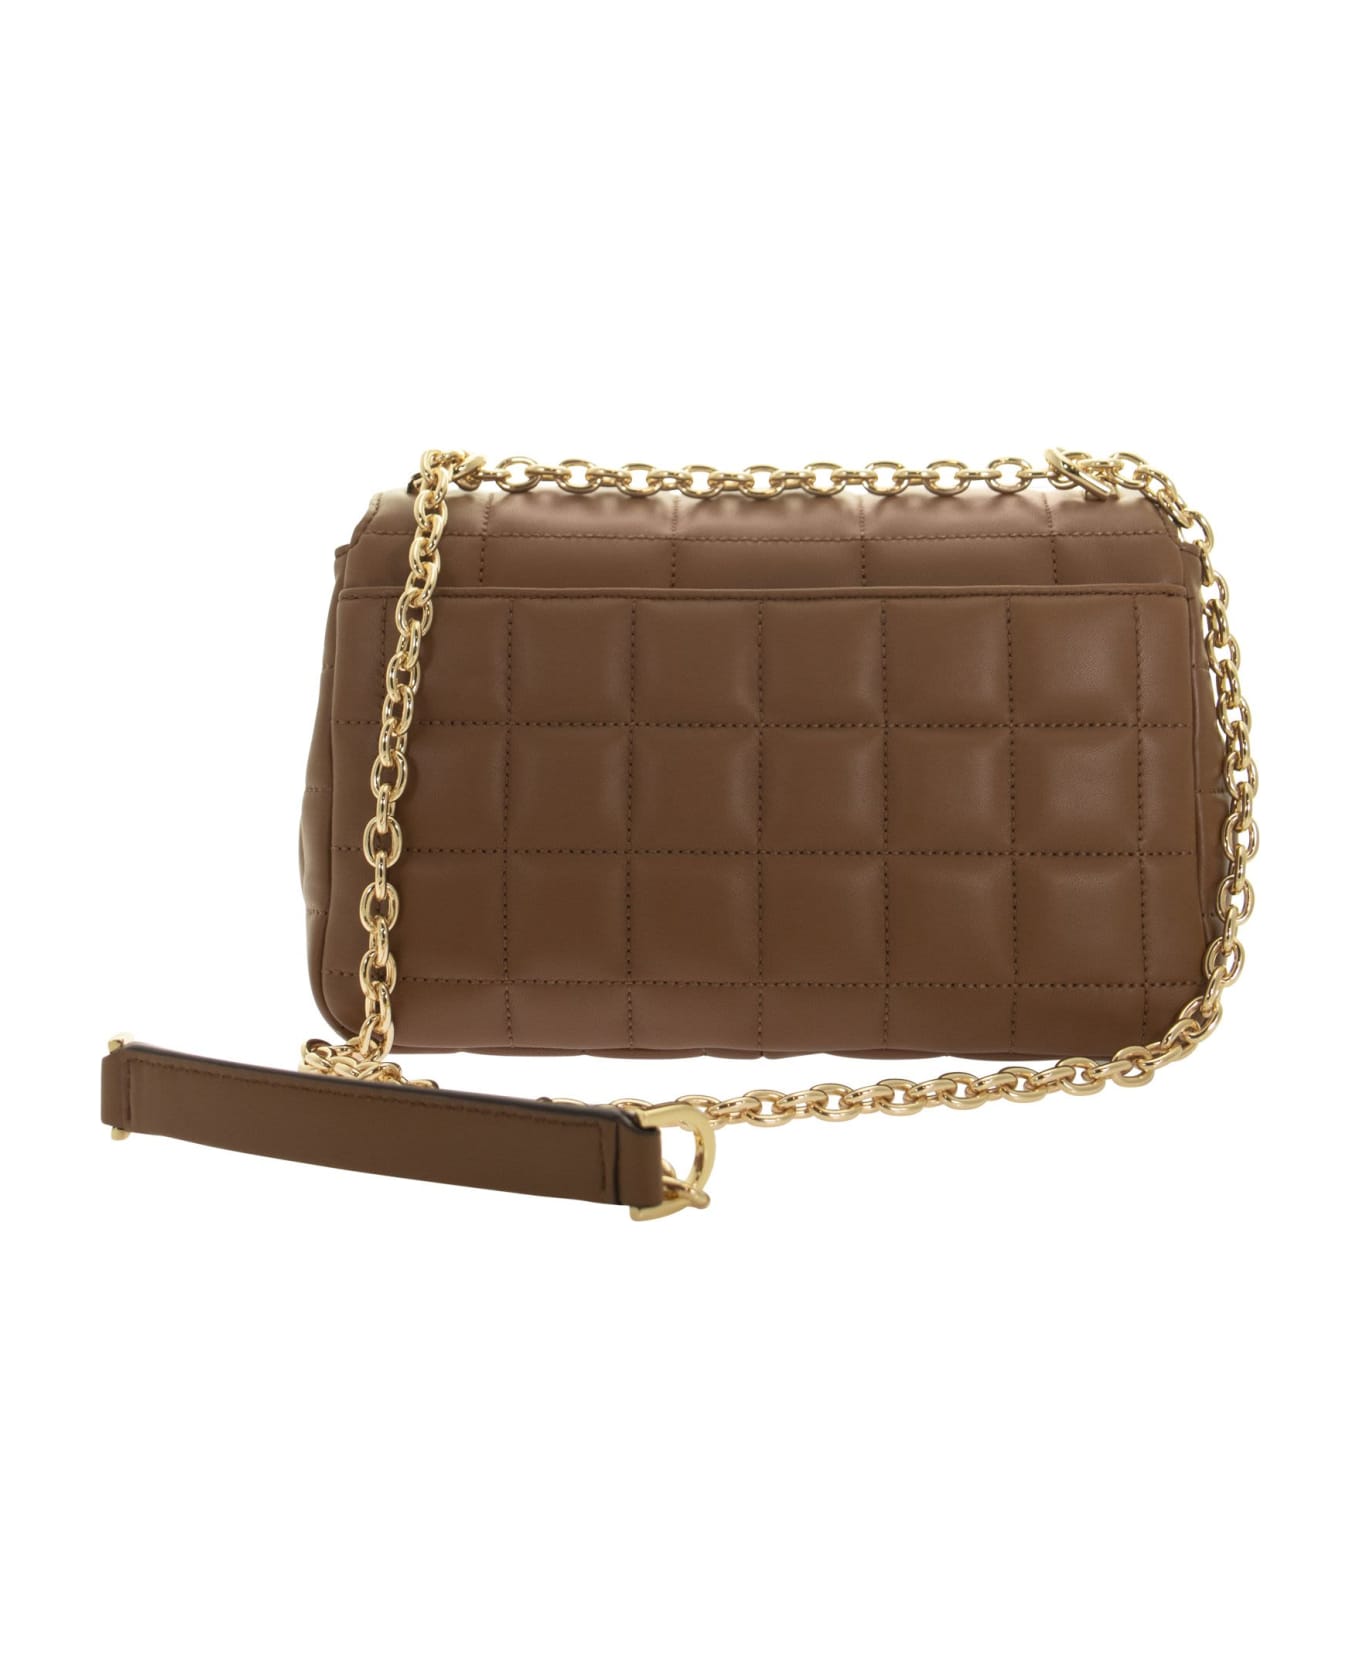 Michael Kors Soho - Quilted Leather Shoulder Bag - Brown ショルダーバッグ